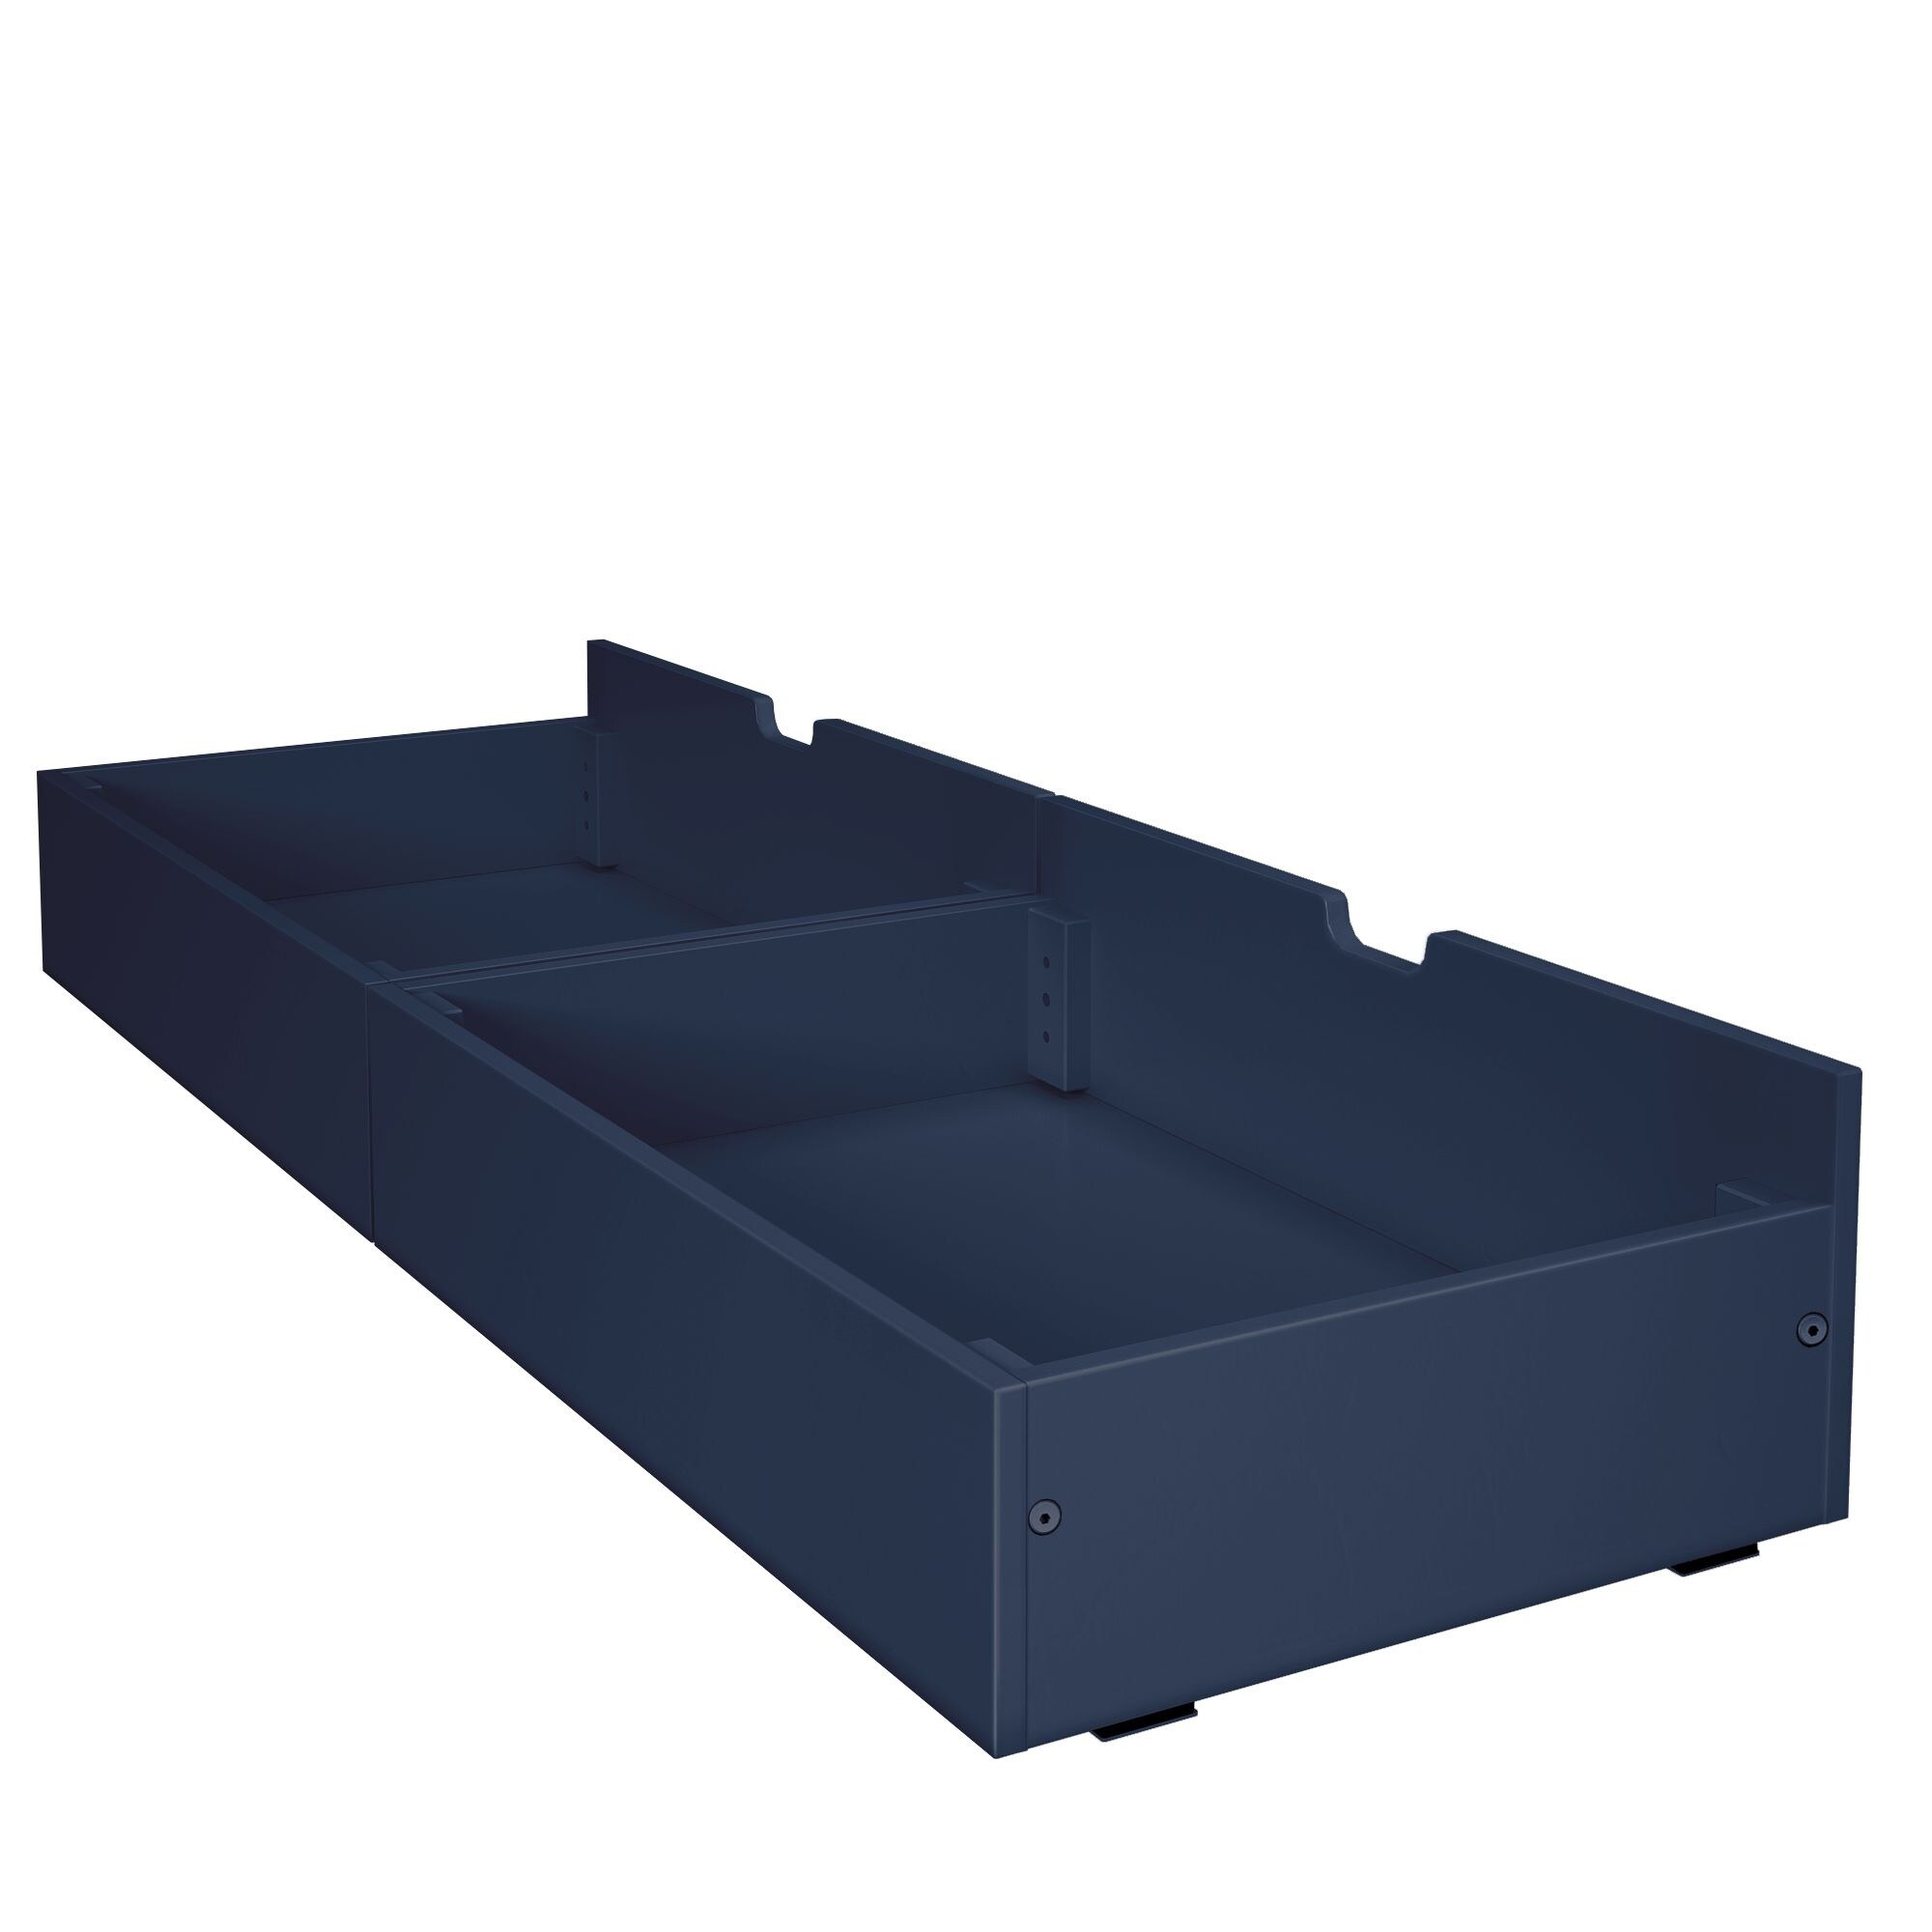 https://ak1.ostkcdn.com/images/products/is/images/direct/01da1b4e3fa268d378436b128fd124c1ef7c0e8e/Max-%26-Lily-Under-Bed-Storage-Drawers.jpg